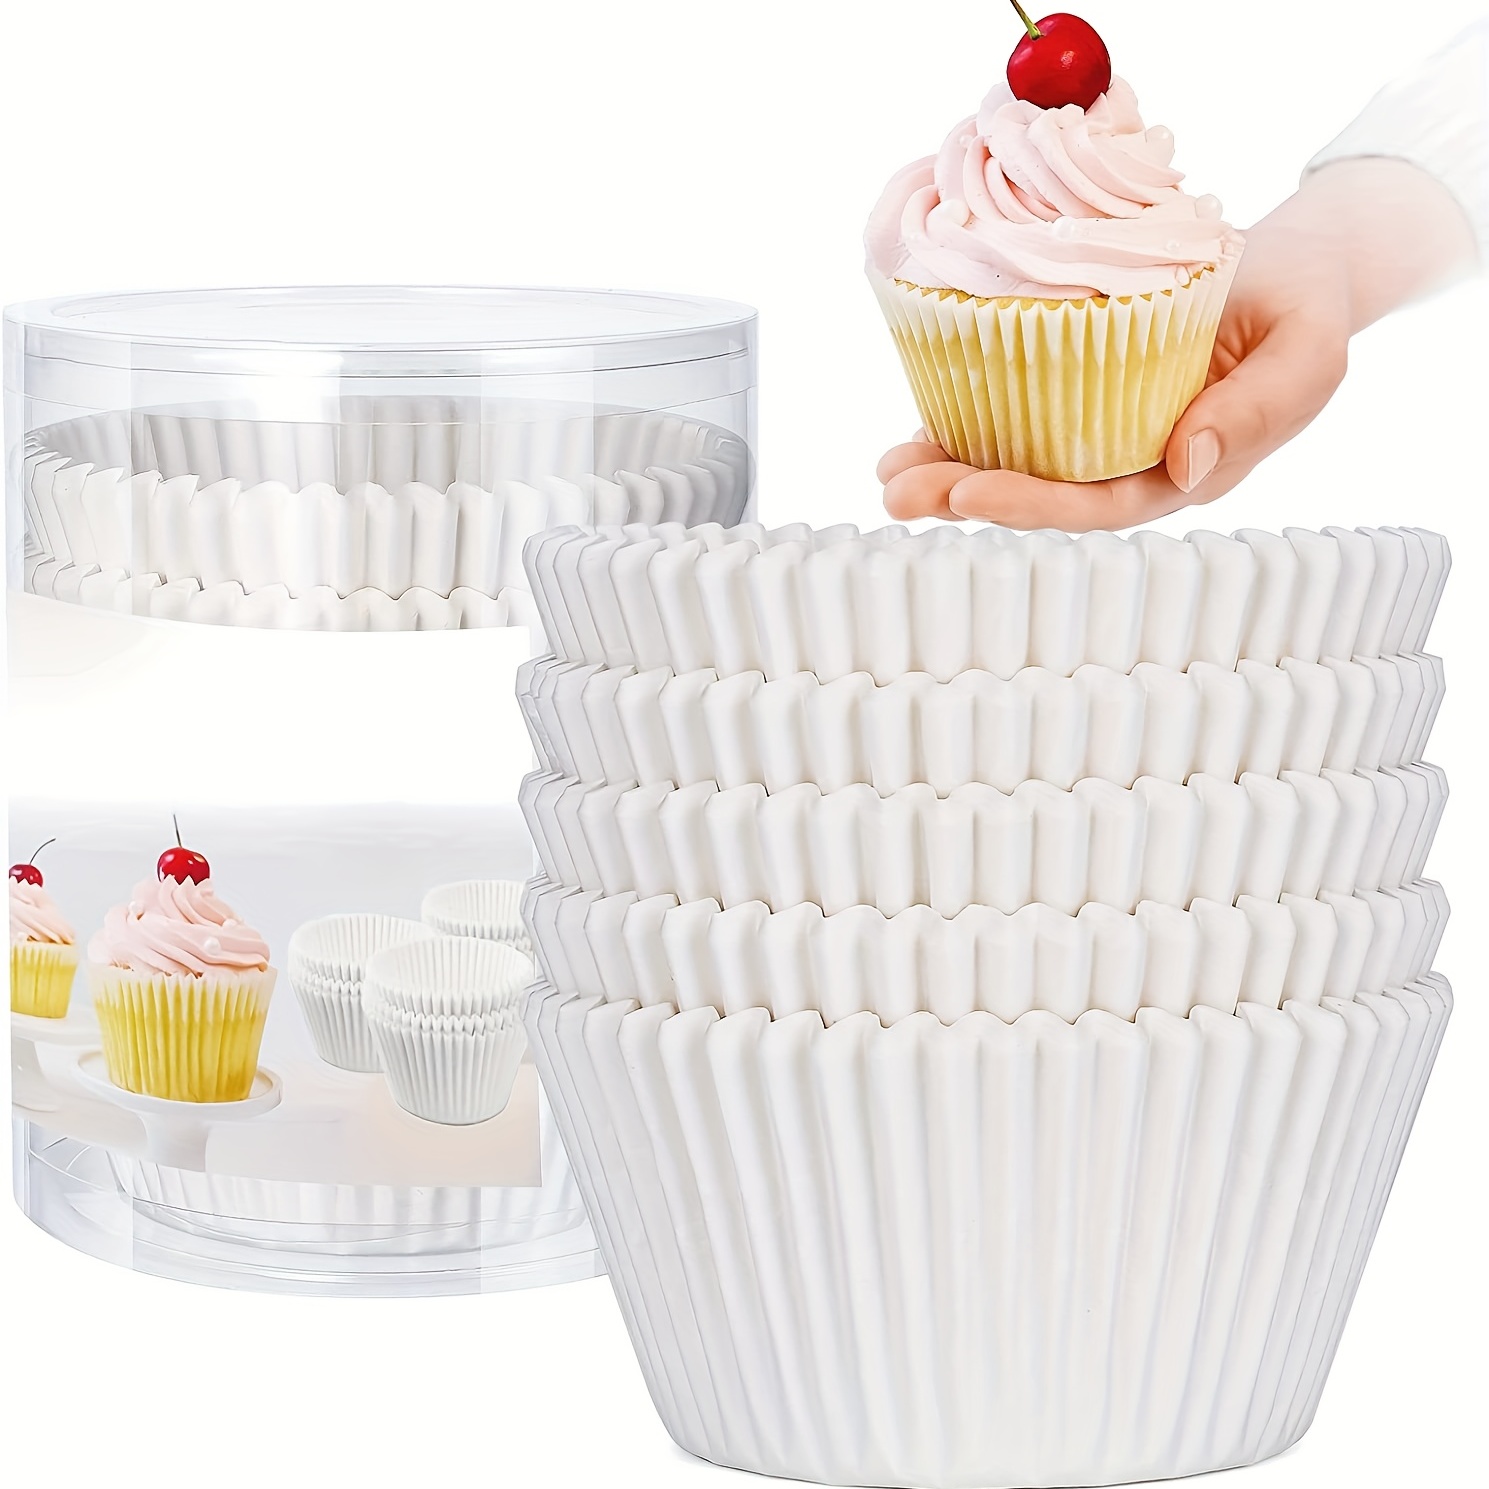 100pcs Random Muffin Cupcake Paper,Cupcake Liner Baking Muffin Box Cup  Case, Party Tray Cake Decorating Tools Birthday Party Decor